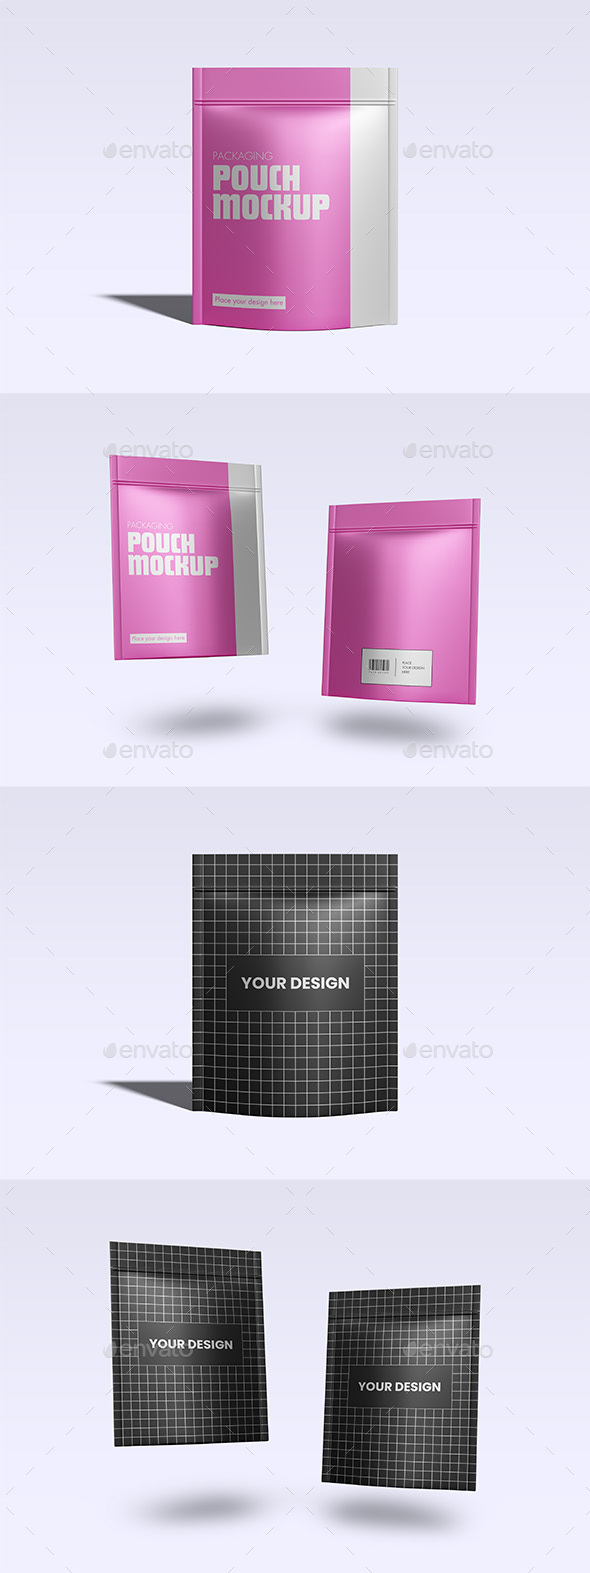 [DOWNLOAD]Stand Up Pouch Mockup